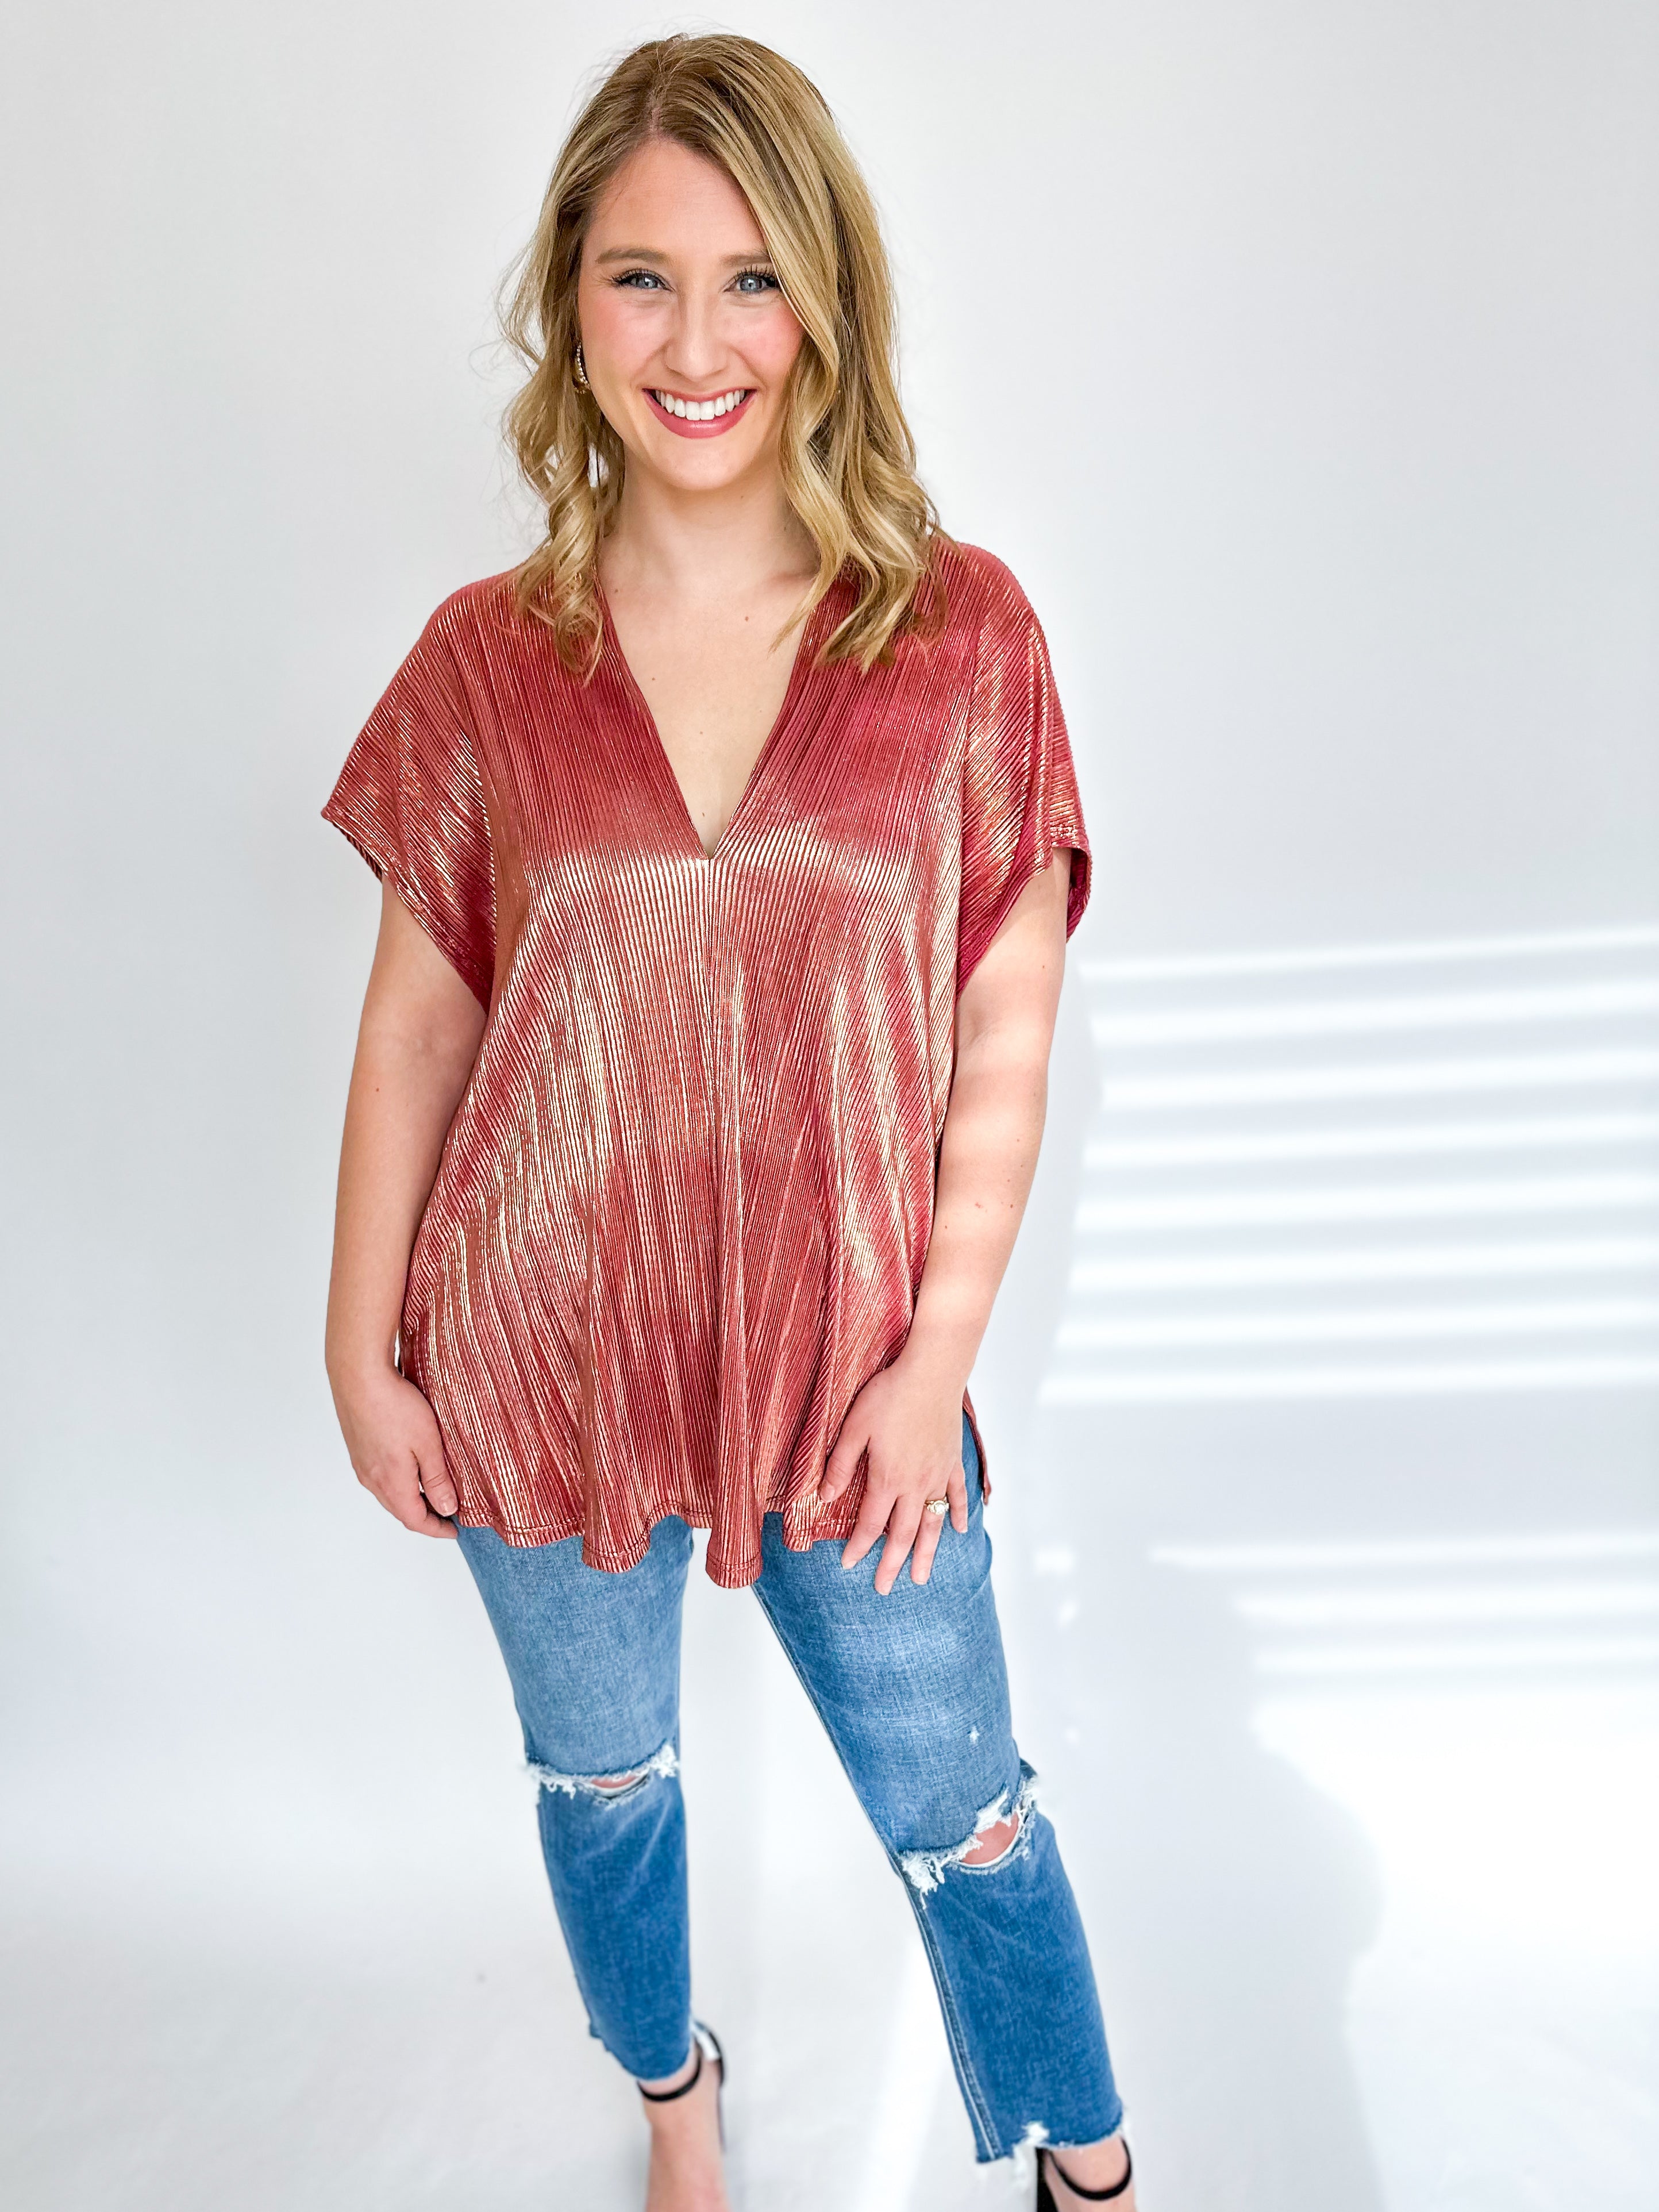 Rosey Glam Blouse-200 Fashion Blouses-ADRIENNE-July & June Women's Fashion Boutique Located in San Antonio, Texas